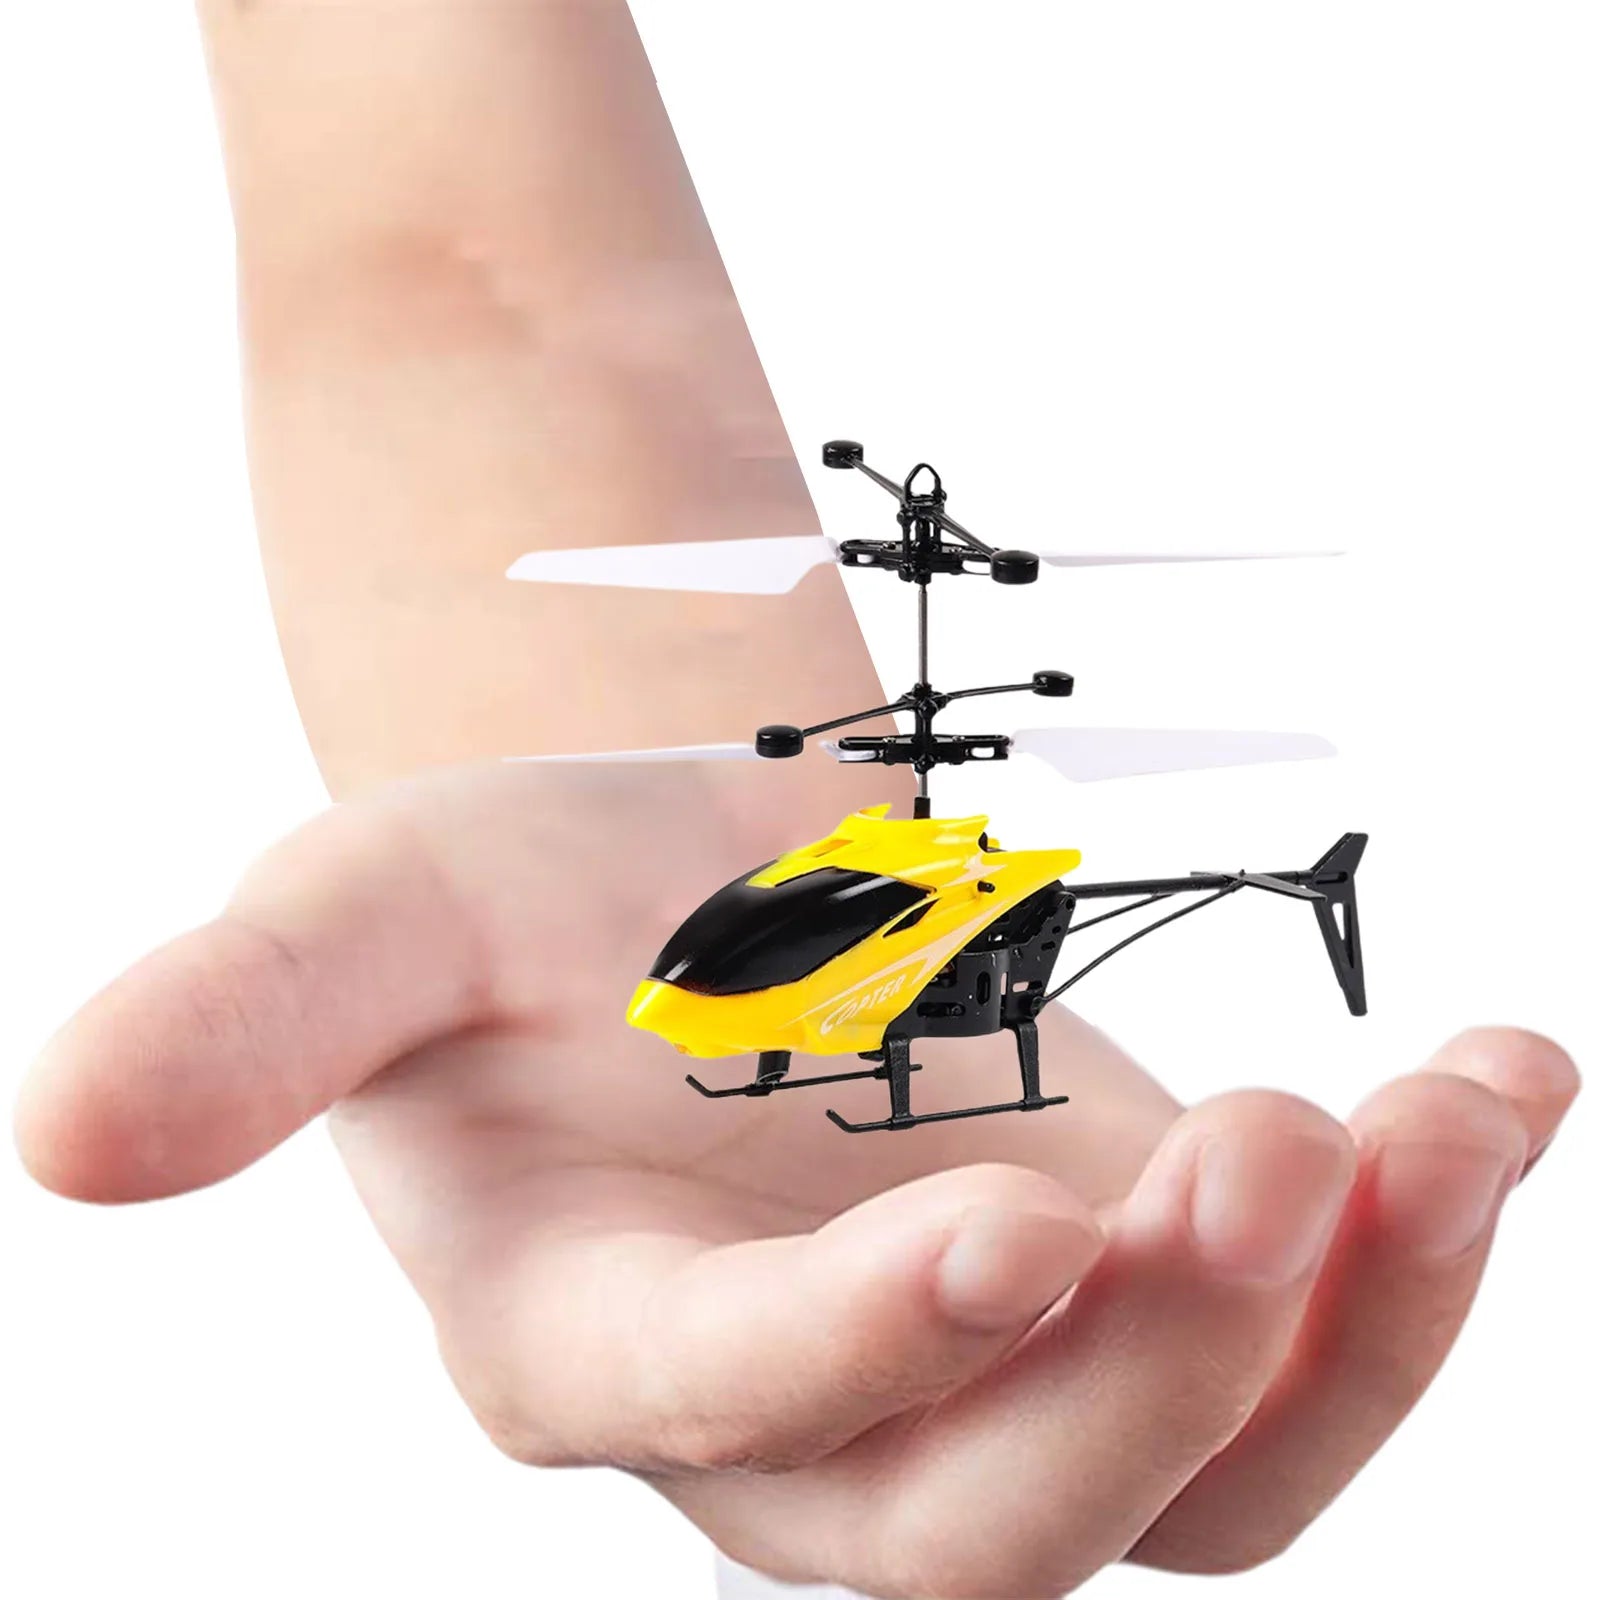 YKF1303 RC Helicopter - 2 Way Remote Control Helic